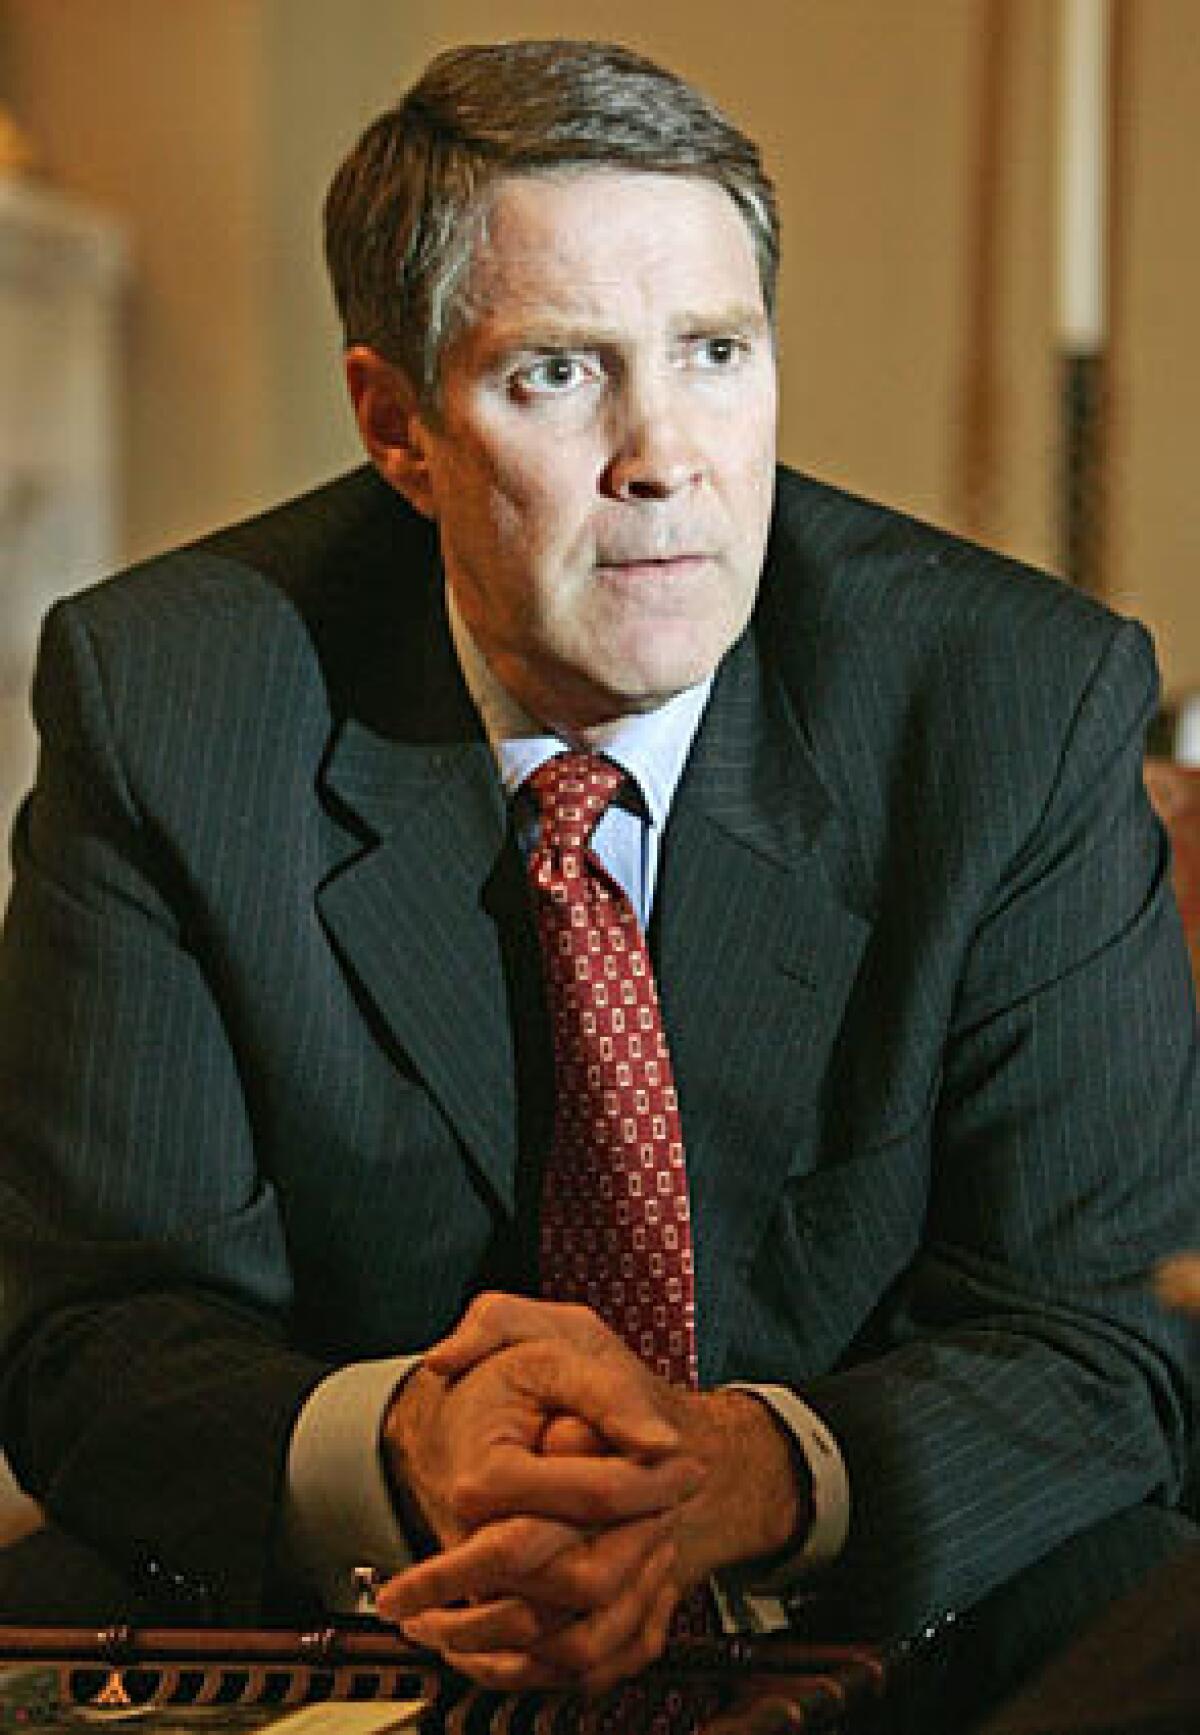 BILL FRIST: The Senate majority leader said he wanted a vote this week on the far-reaching immigration bill.